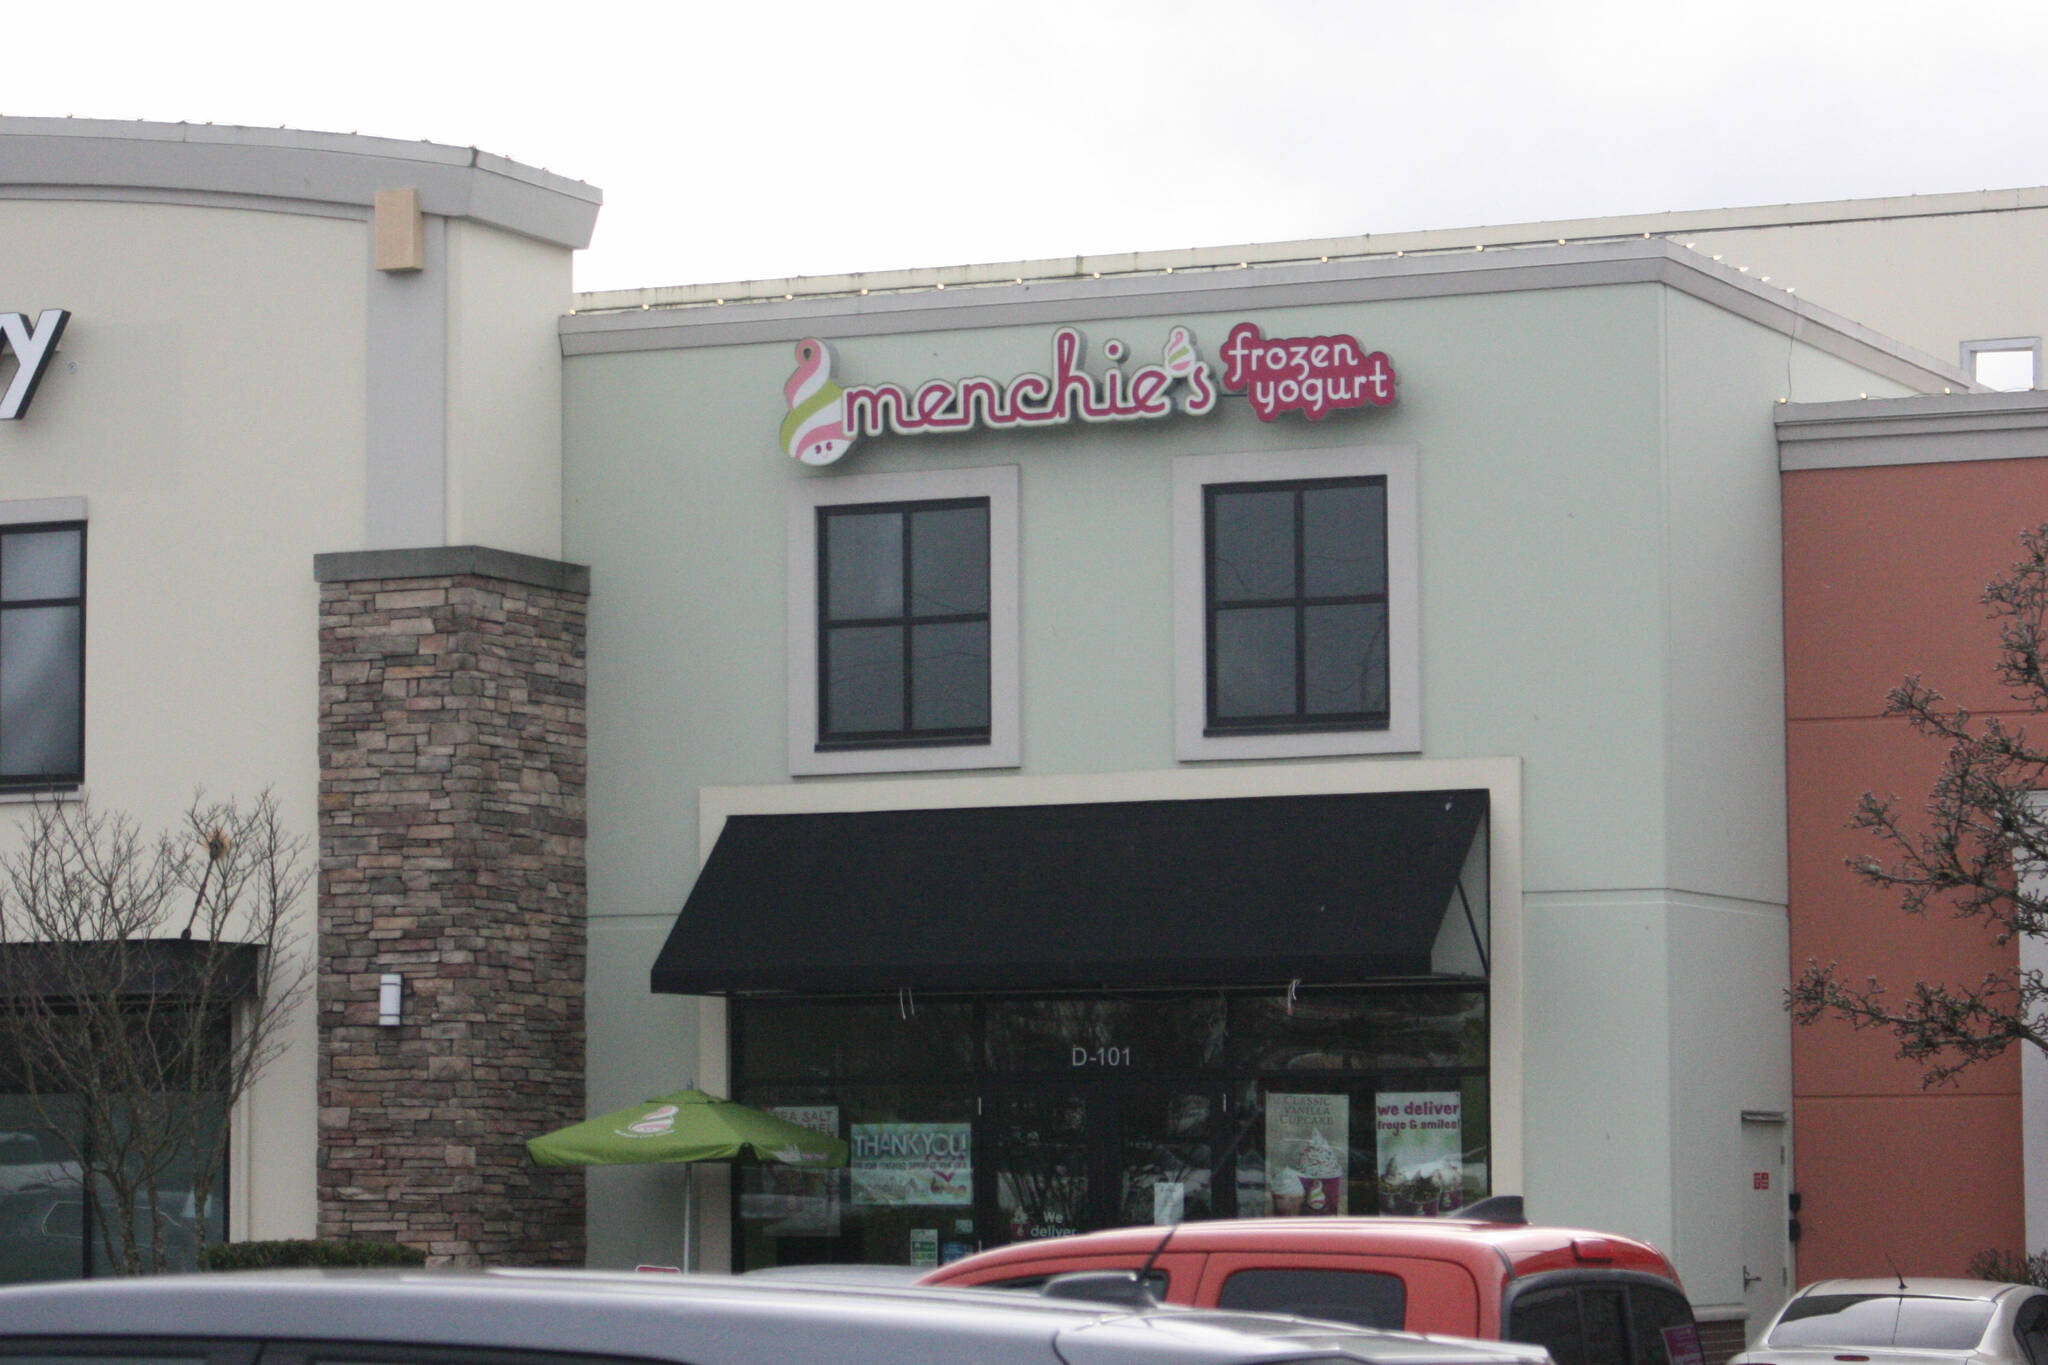 Menchie’s location in Federal Way. (Photo by Cameron Sheppard/Sound Publishing)